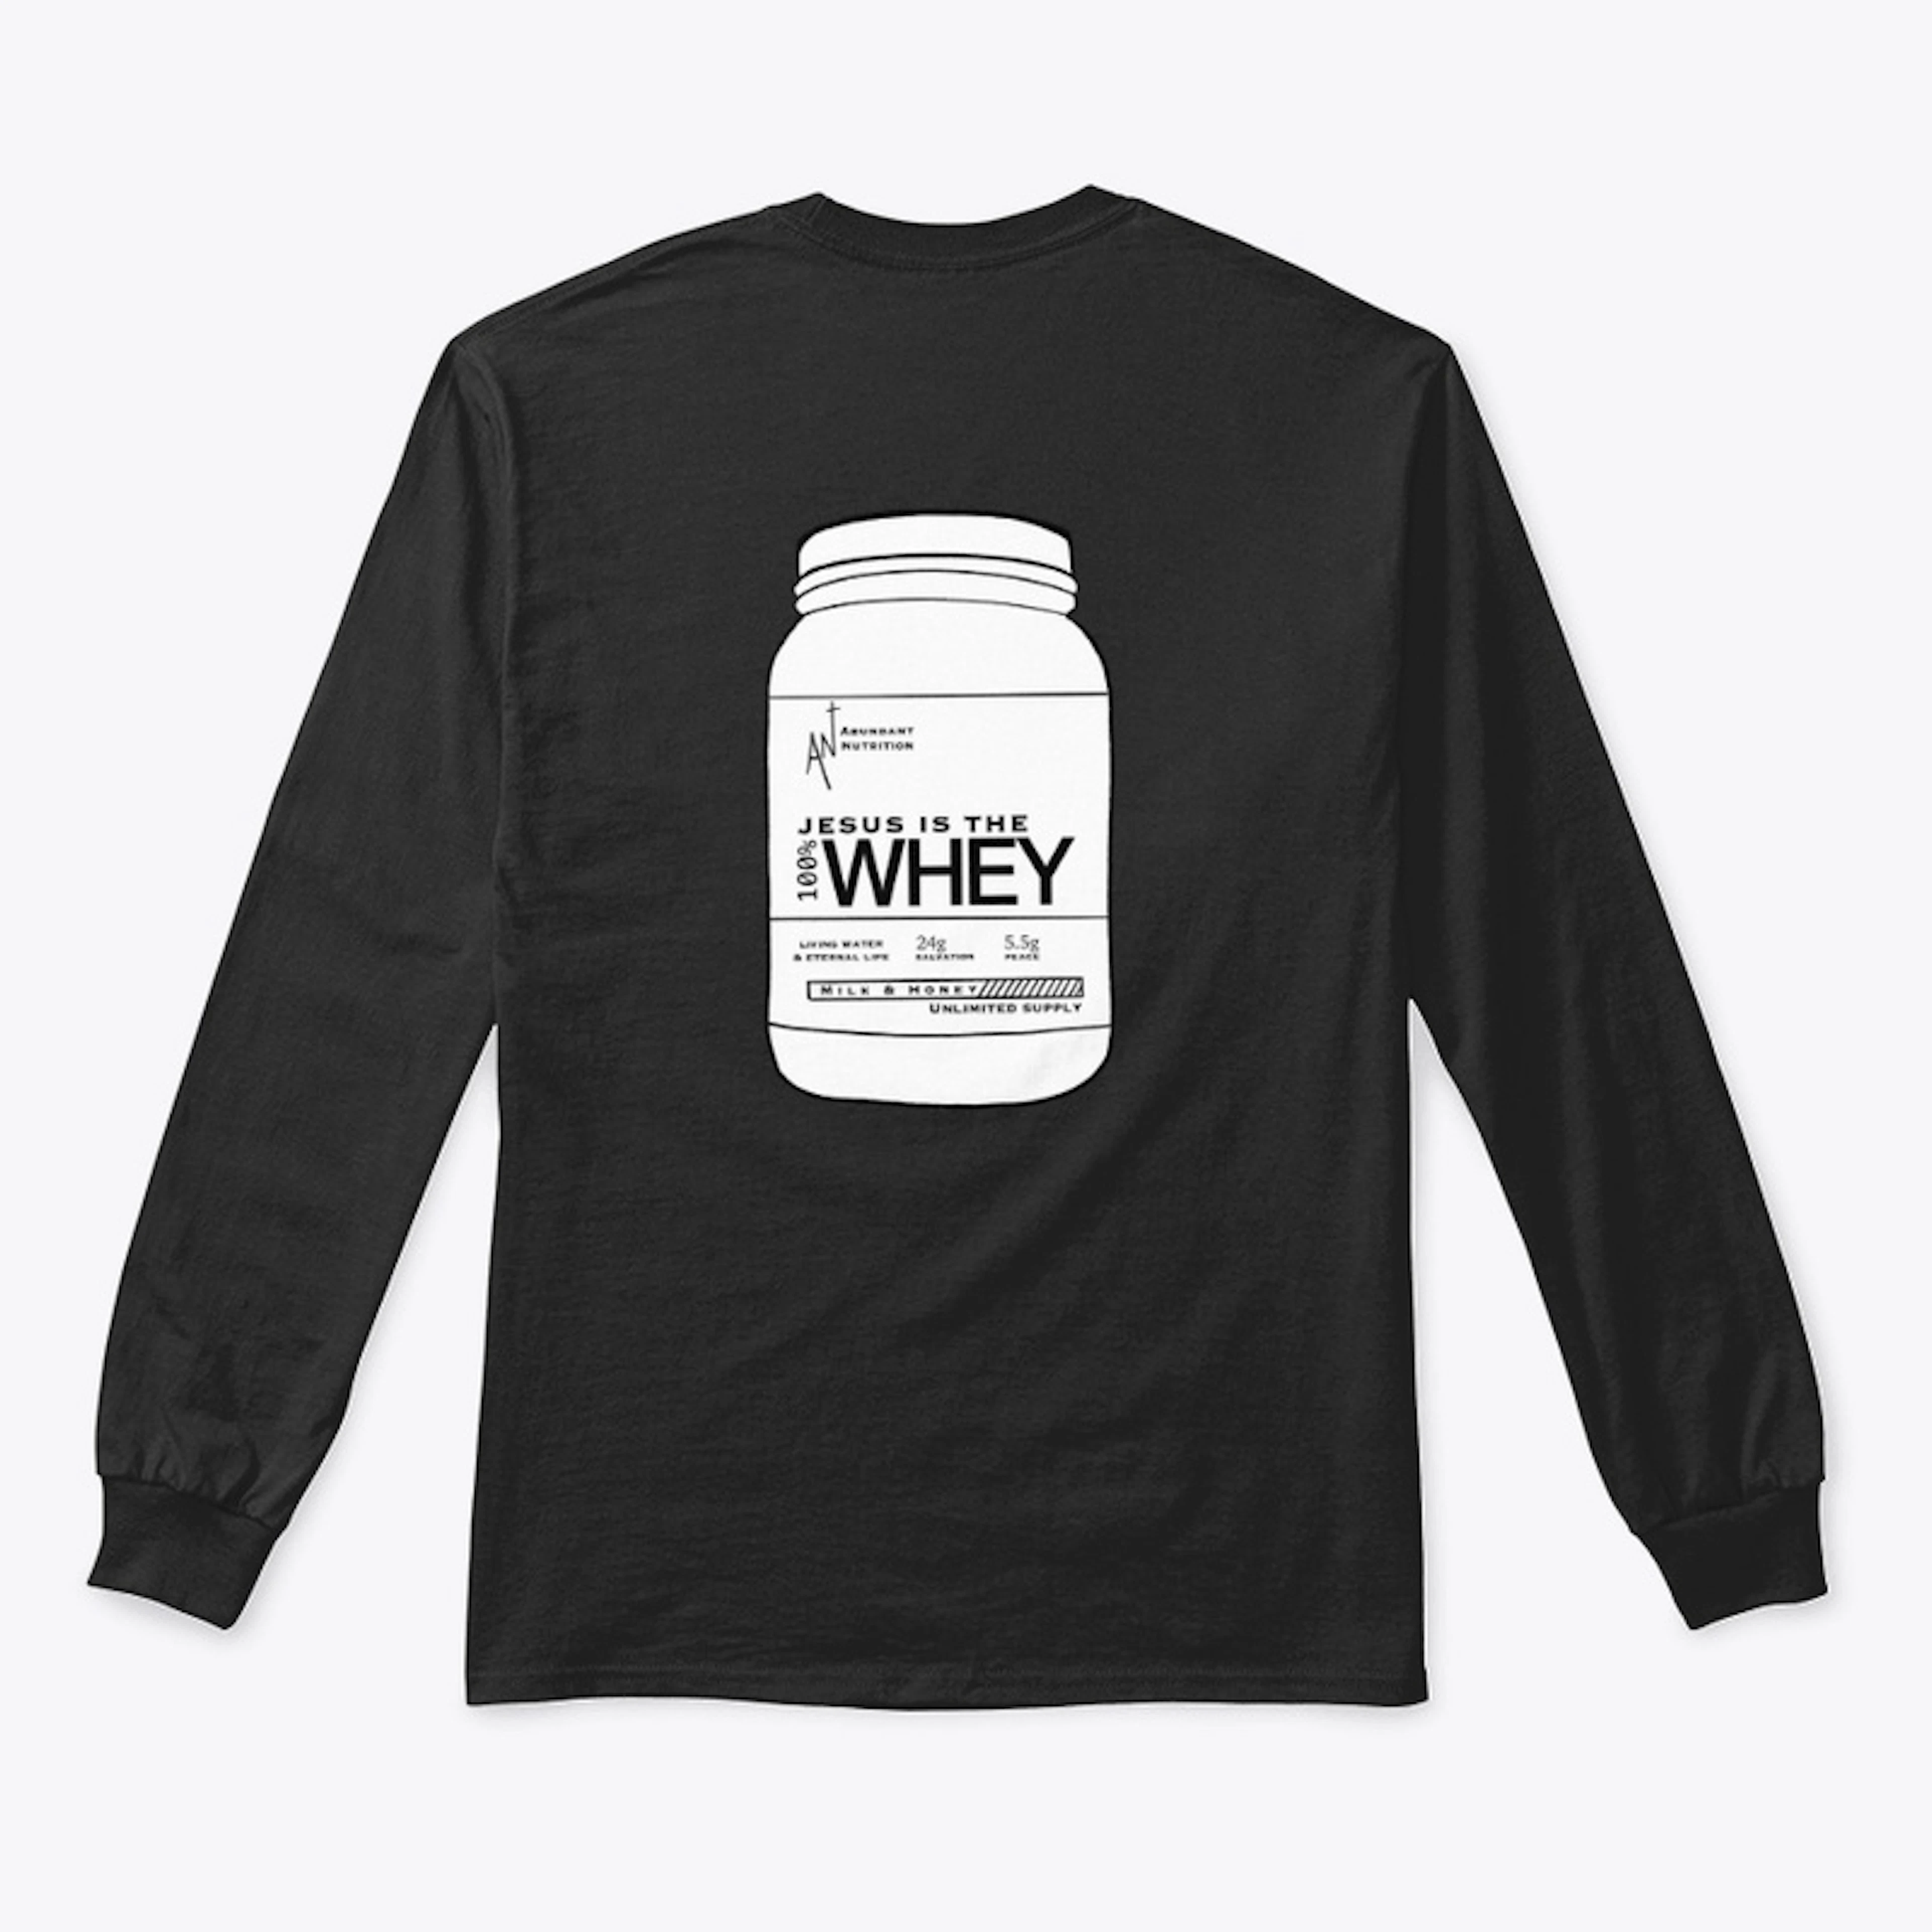 THE WHEY 